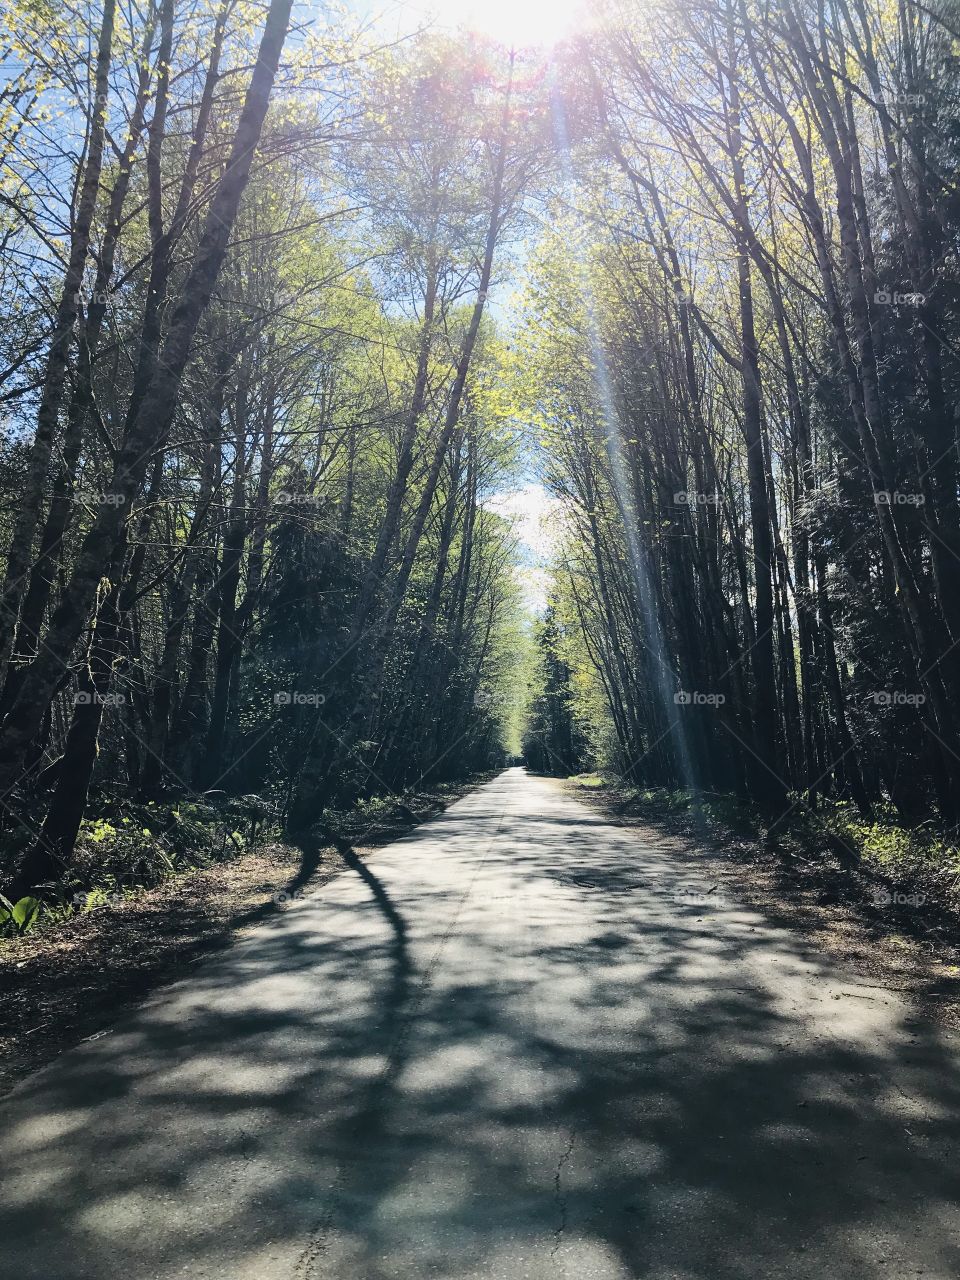 Shot of a rural road with the late day Spring sunshine creating beautiful shadows. The almost fluorescent early Spring green of the emerging leaves contrasting with the dark tree trunks beckons the traveler to follow the path & explore. 